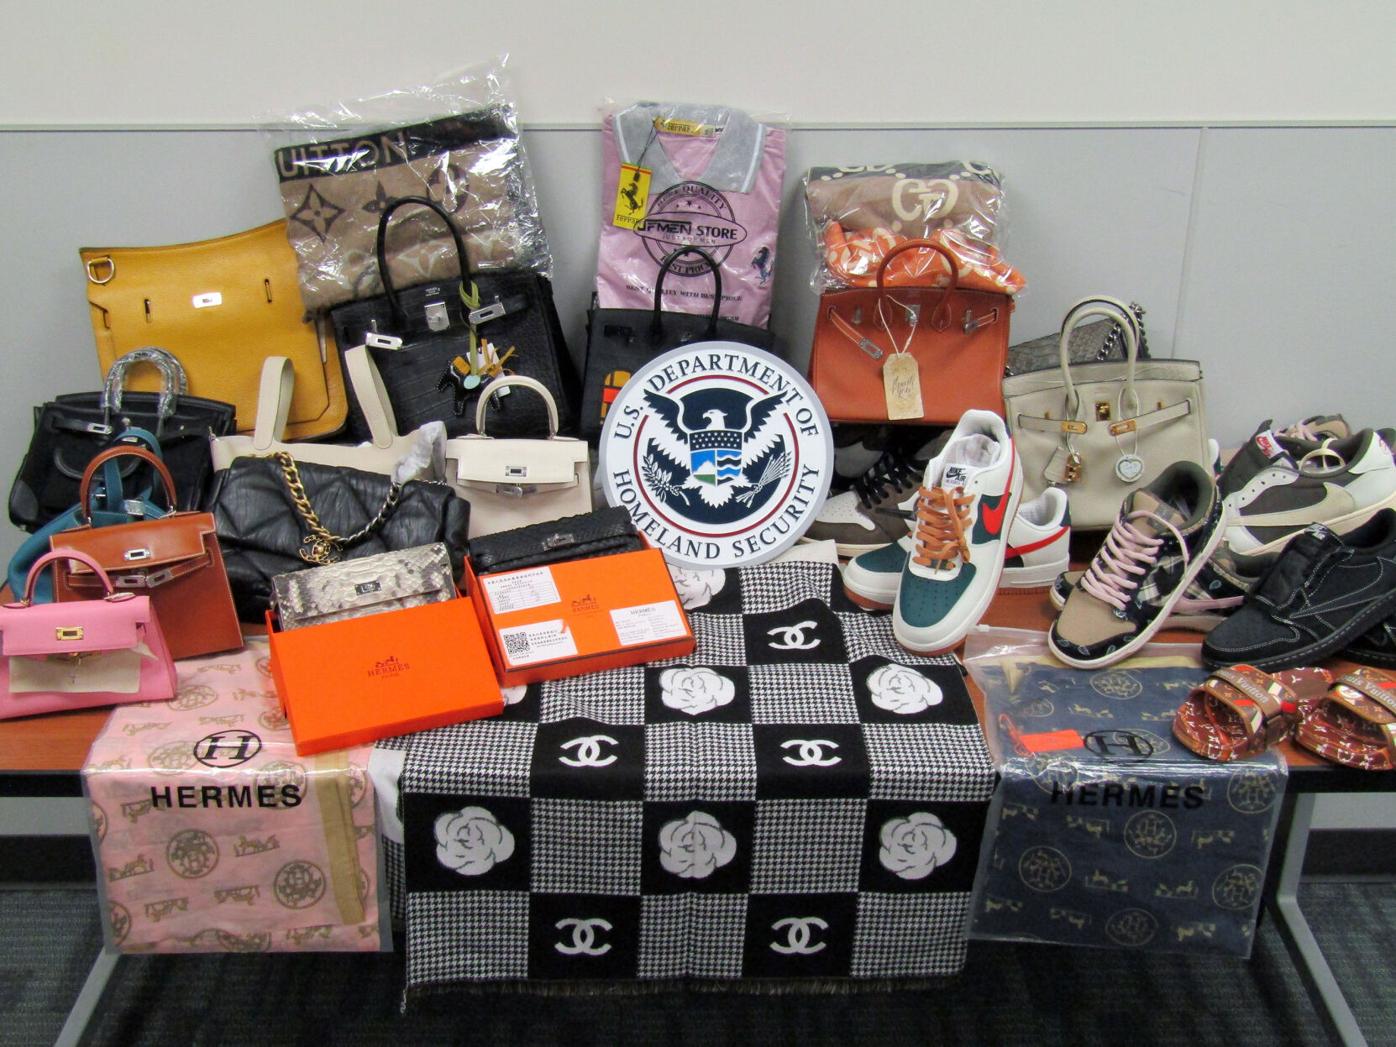 More than 500 fake pairs of Gucci and Chanel earrings seized in